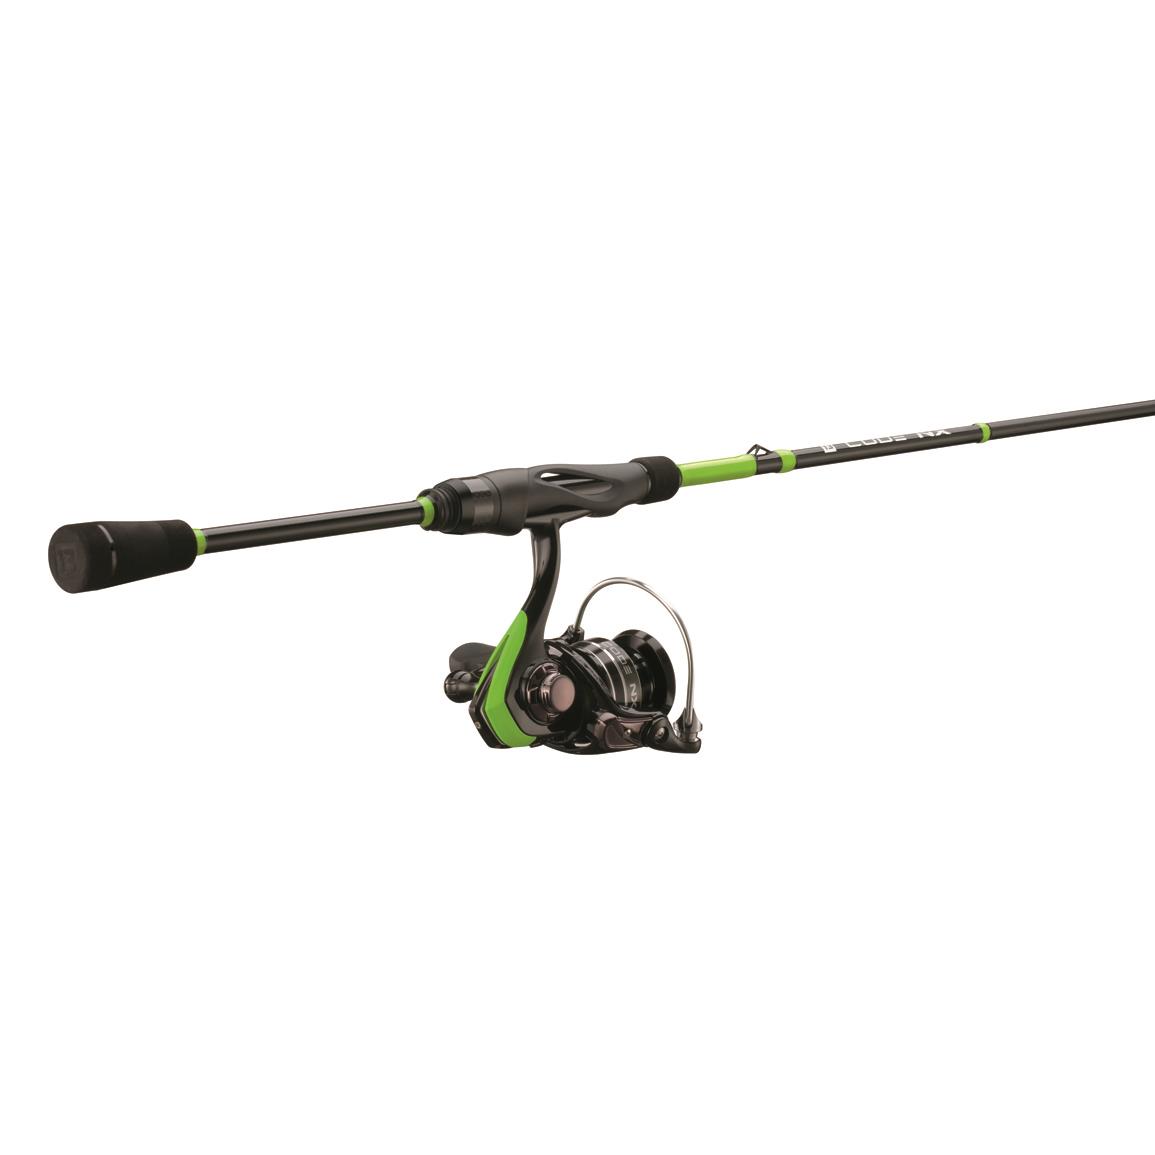 Mr. Crappie Crappie Thunder® Spinning Combo - 732866, Spinning